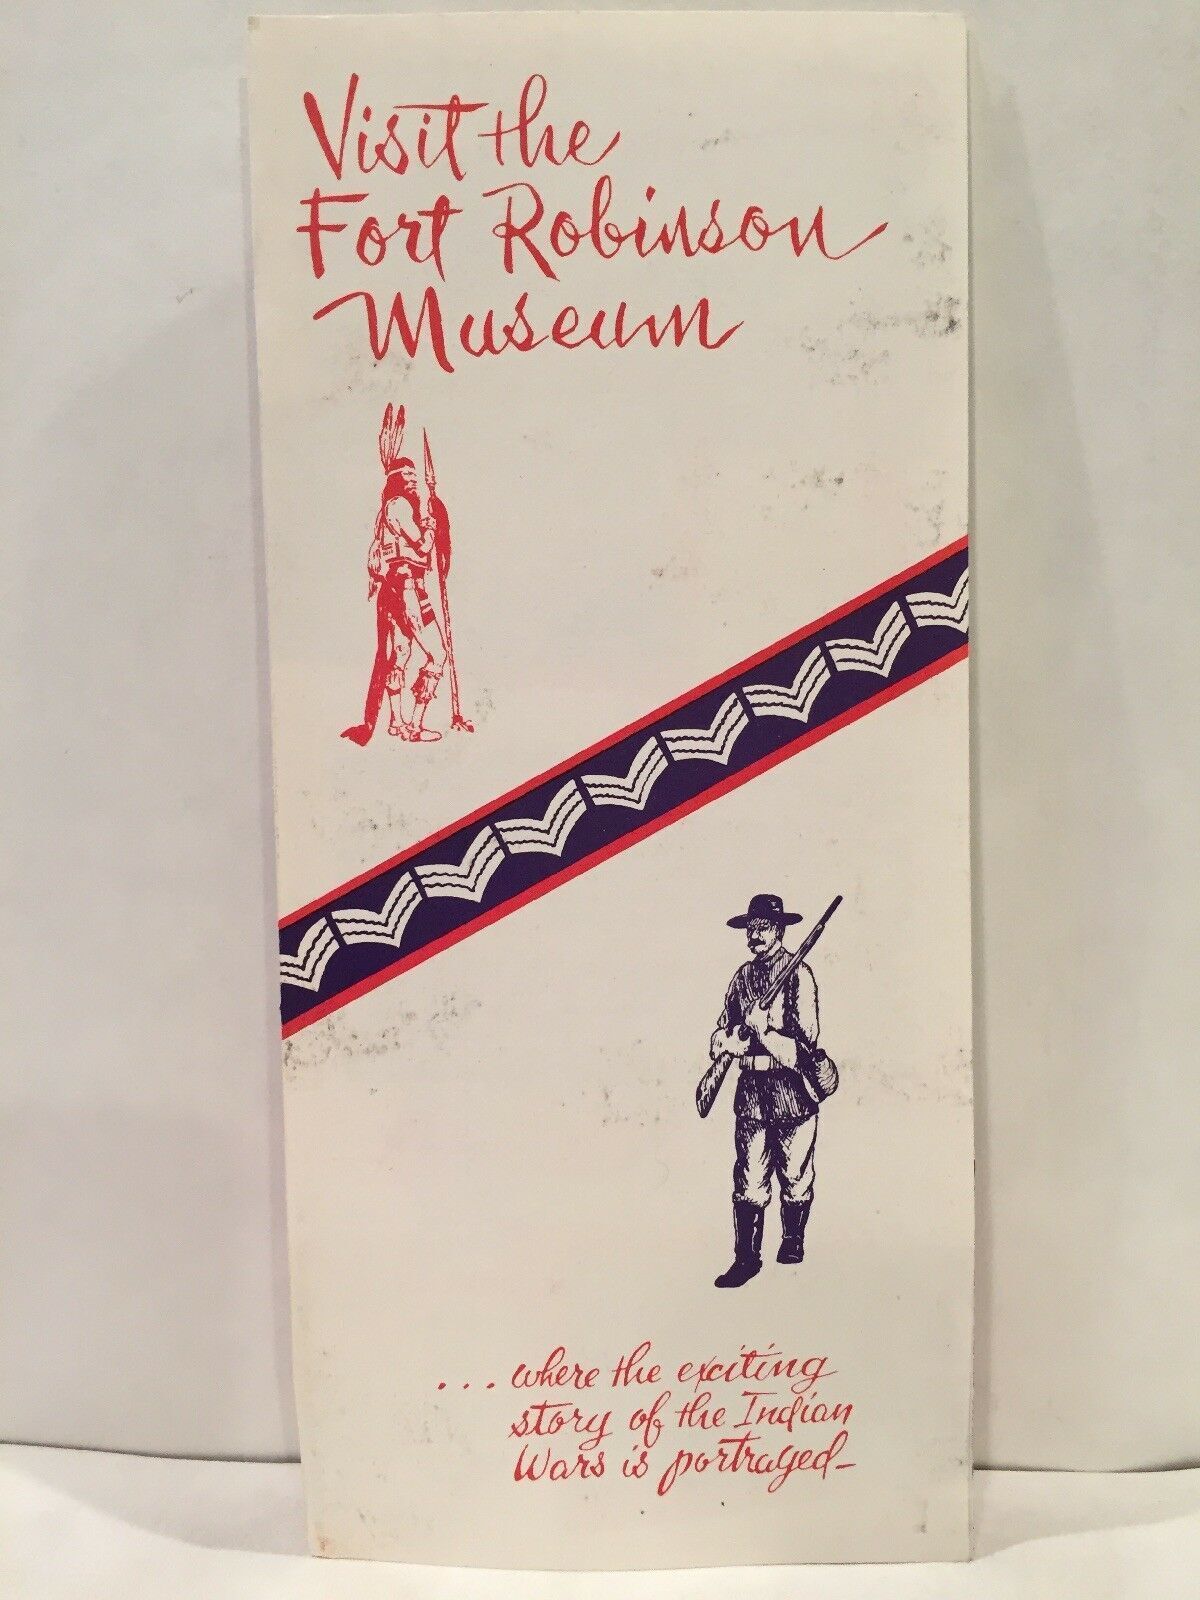 1968 VISIT THE FORT ROBINSON MUSEUM \